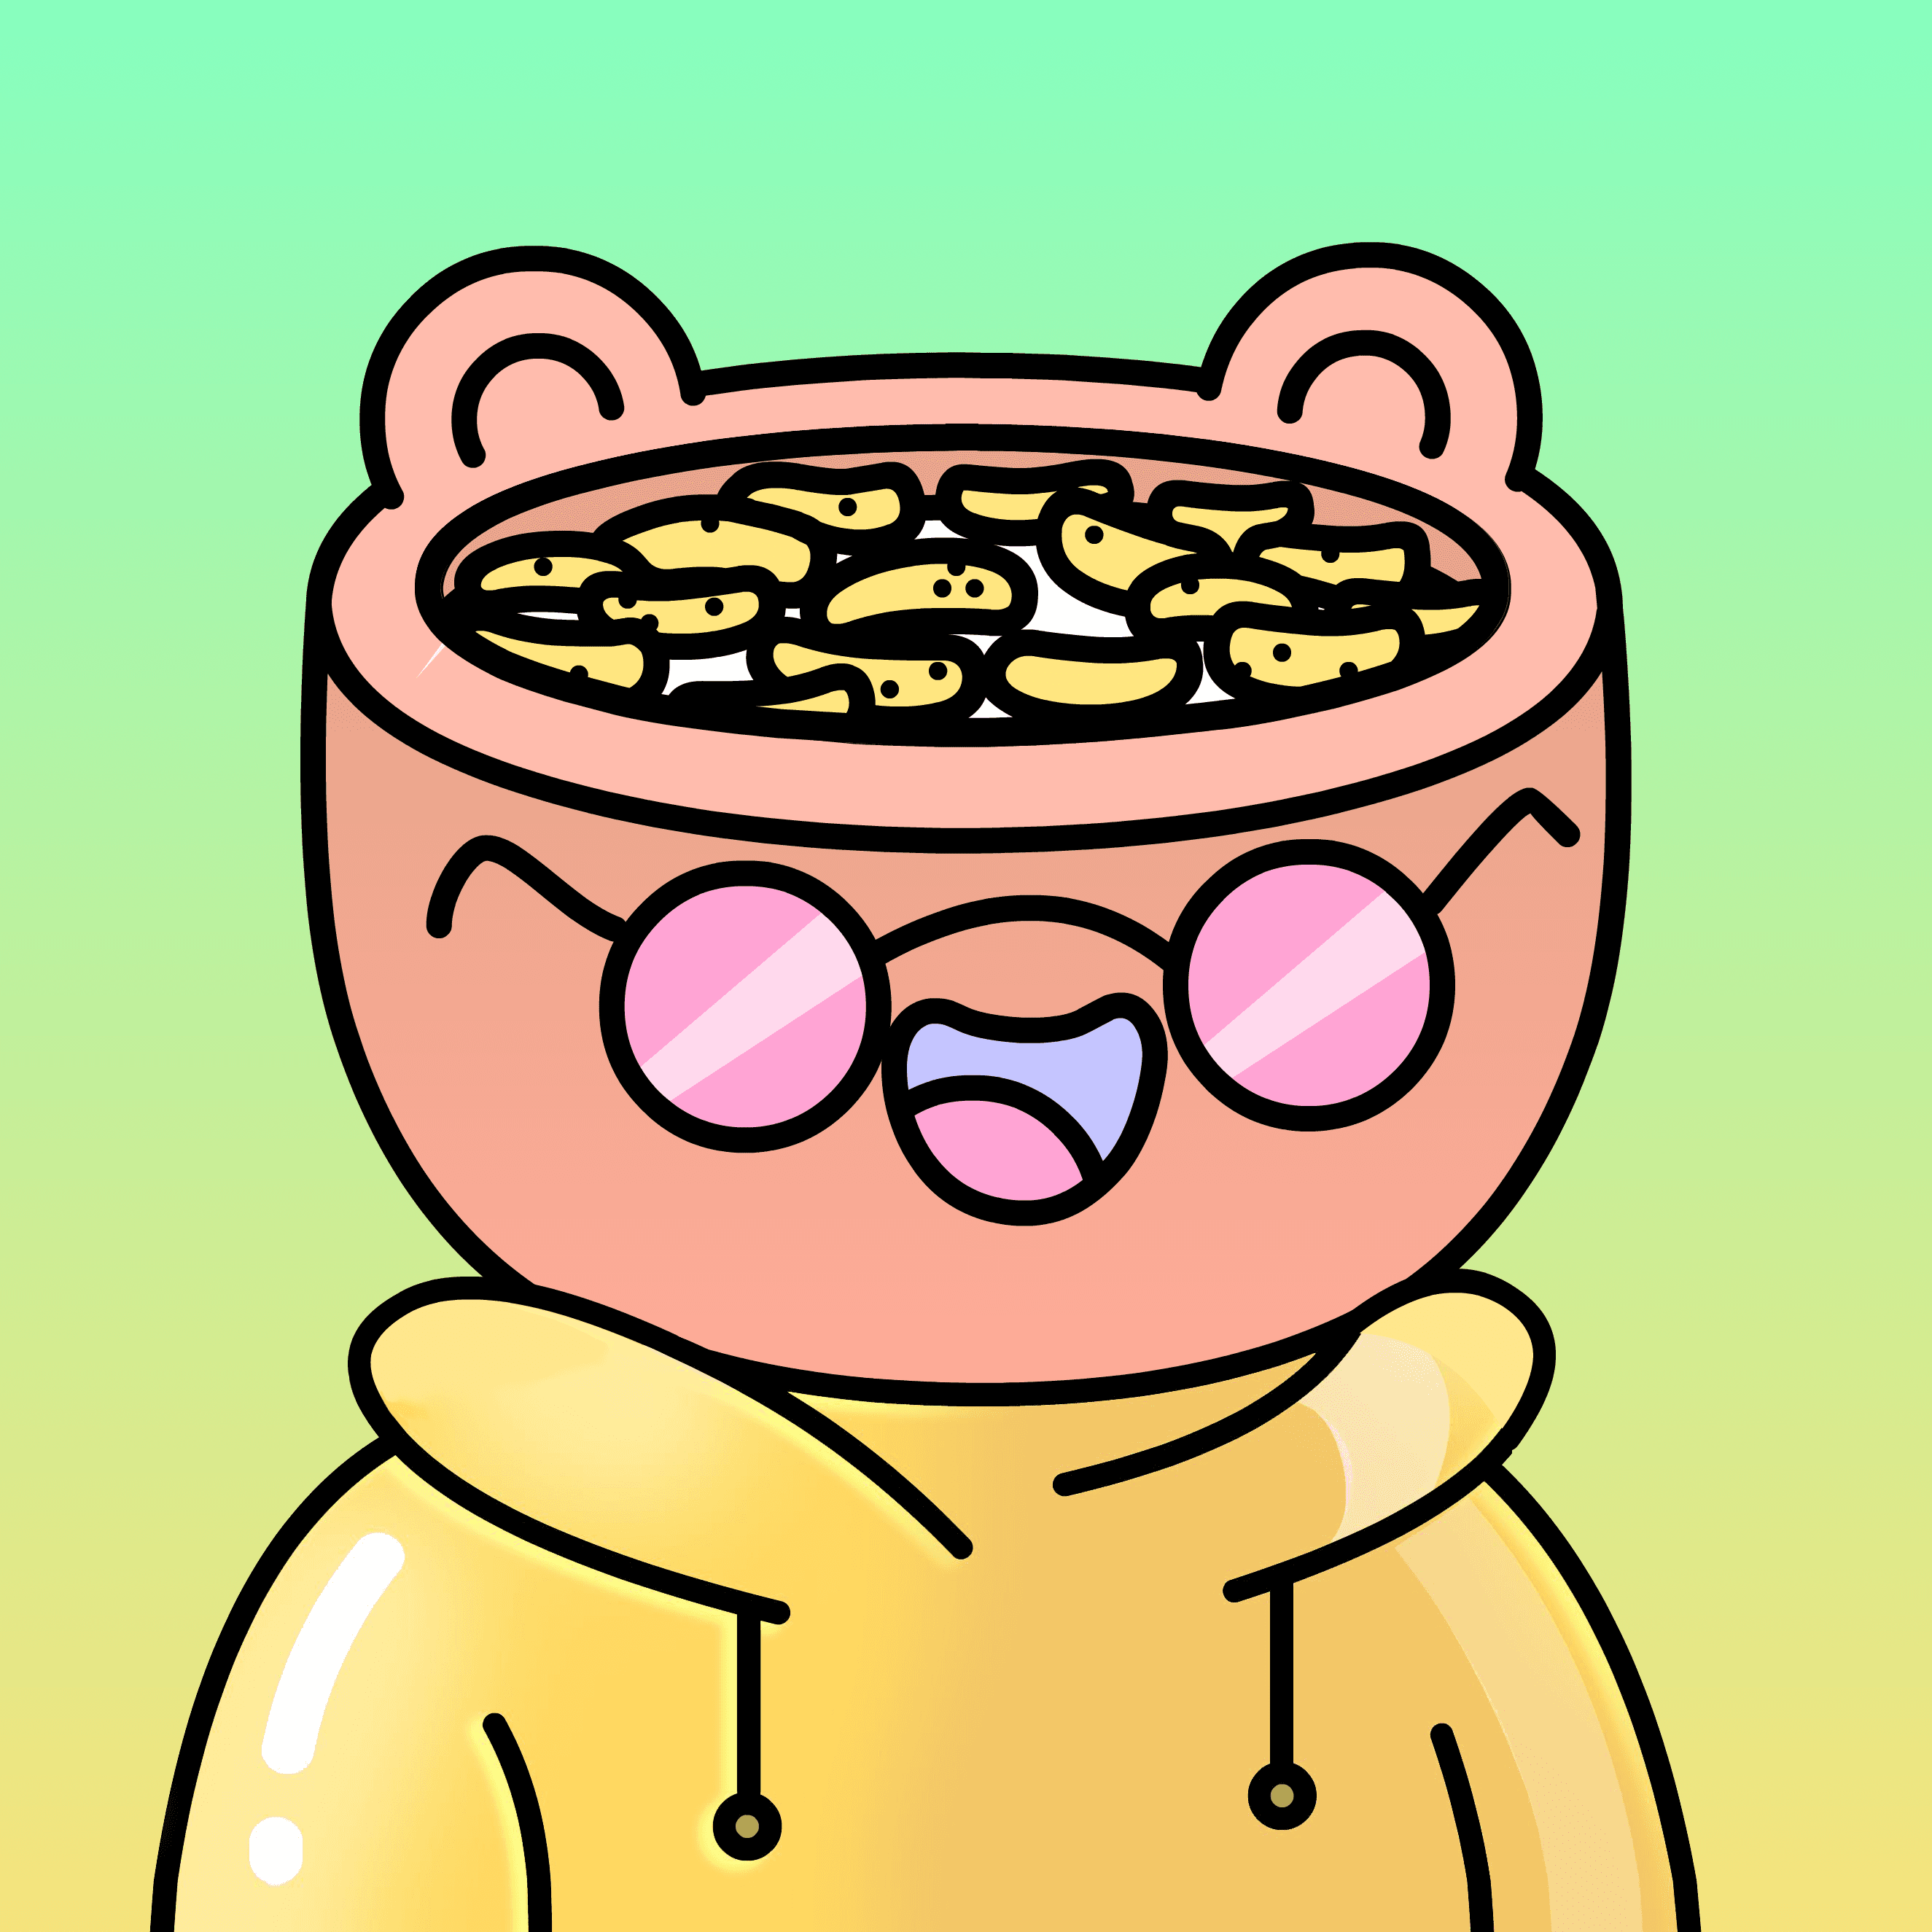 CEREAL #6372